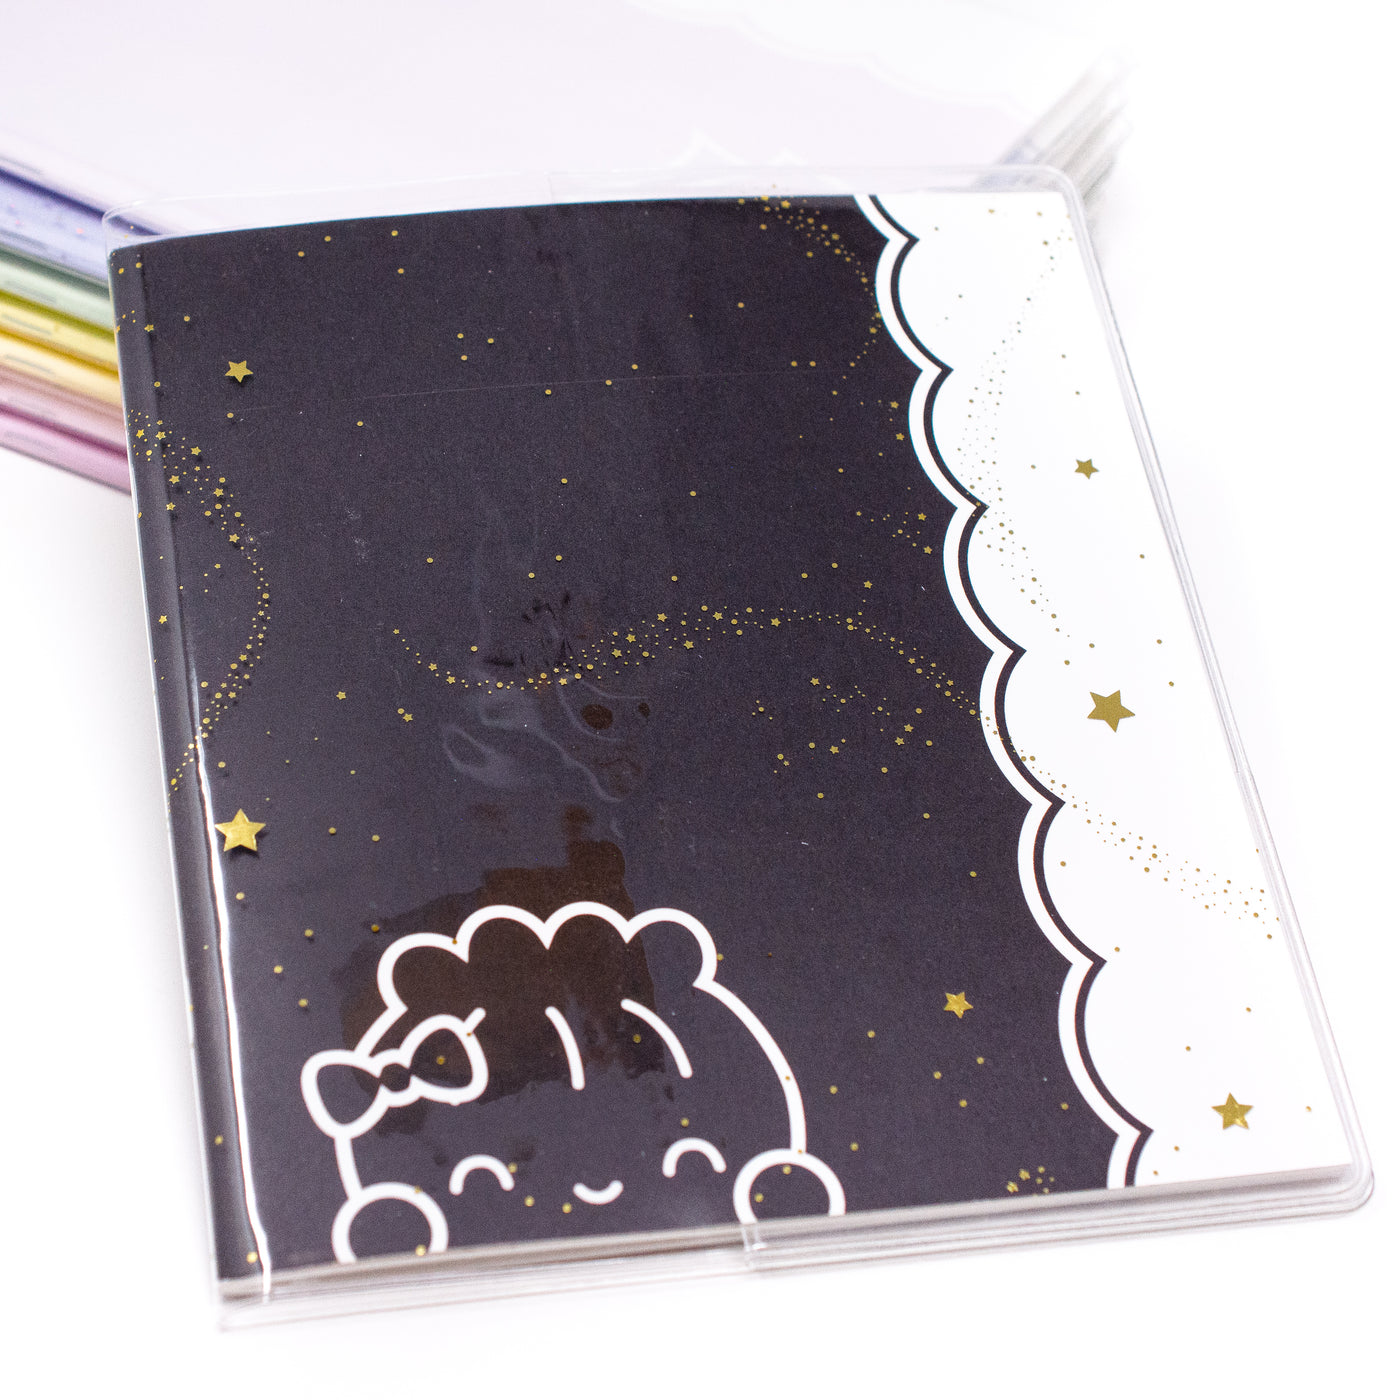 JCOVER001 | Clear Jelly Notebook Cover (A5W - Fits notebooks and undated monthly/weekly/daily planners)